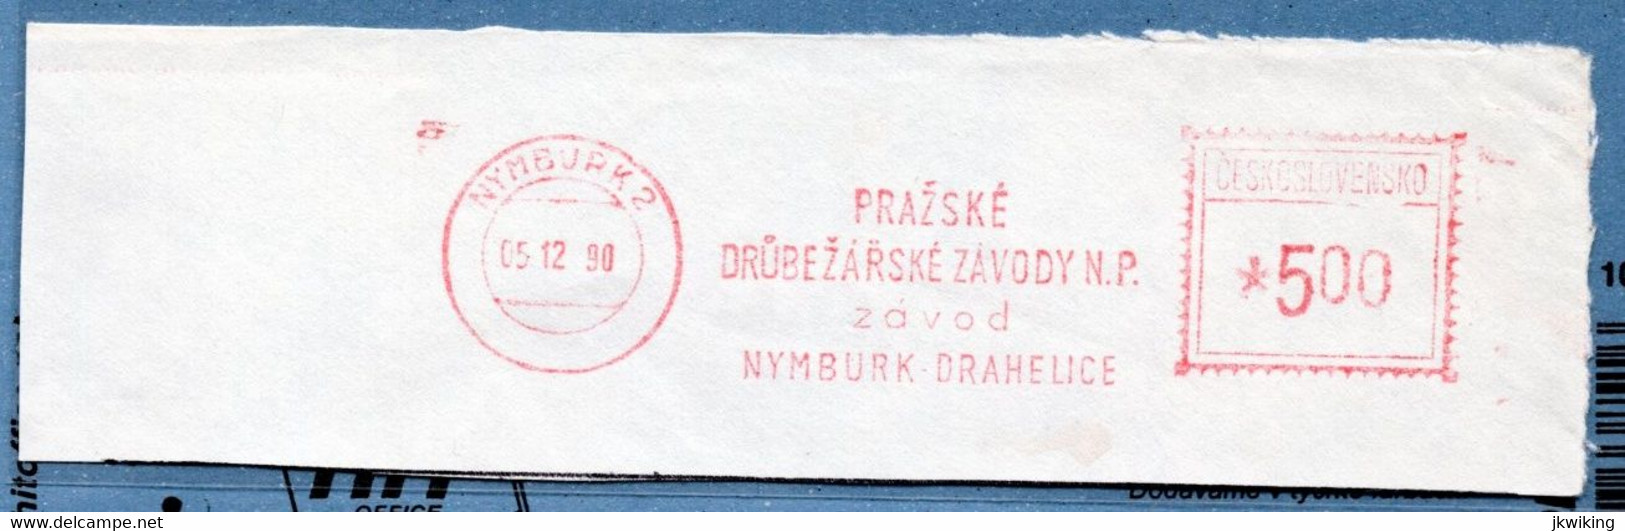 Postage Stamp - Poultry Farms - Poultry - Hens - Nymburk 2 - 5.12.1990 - Mechanical Postmarks (Advertisement)